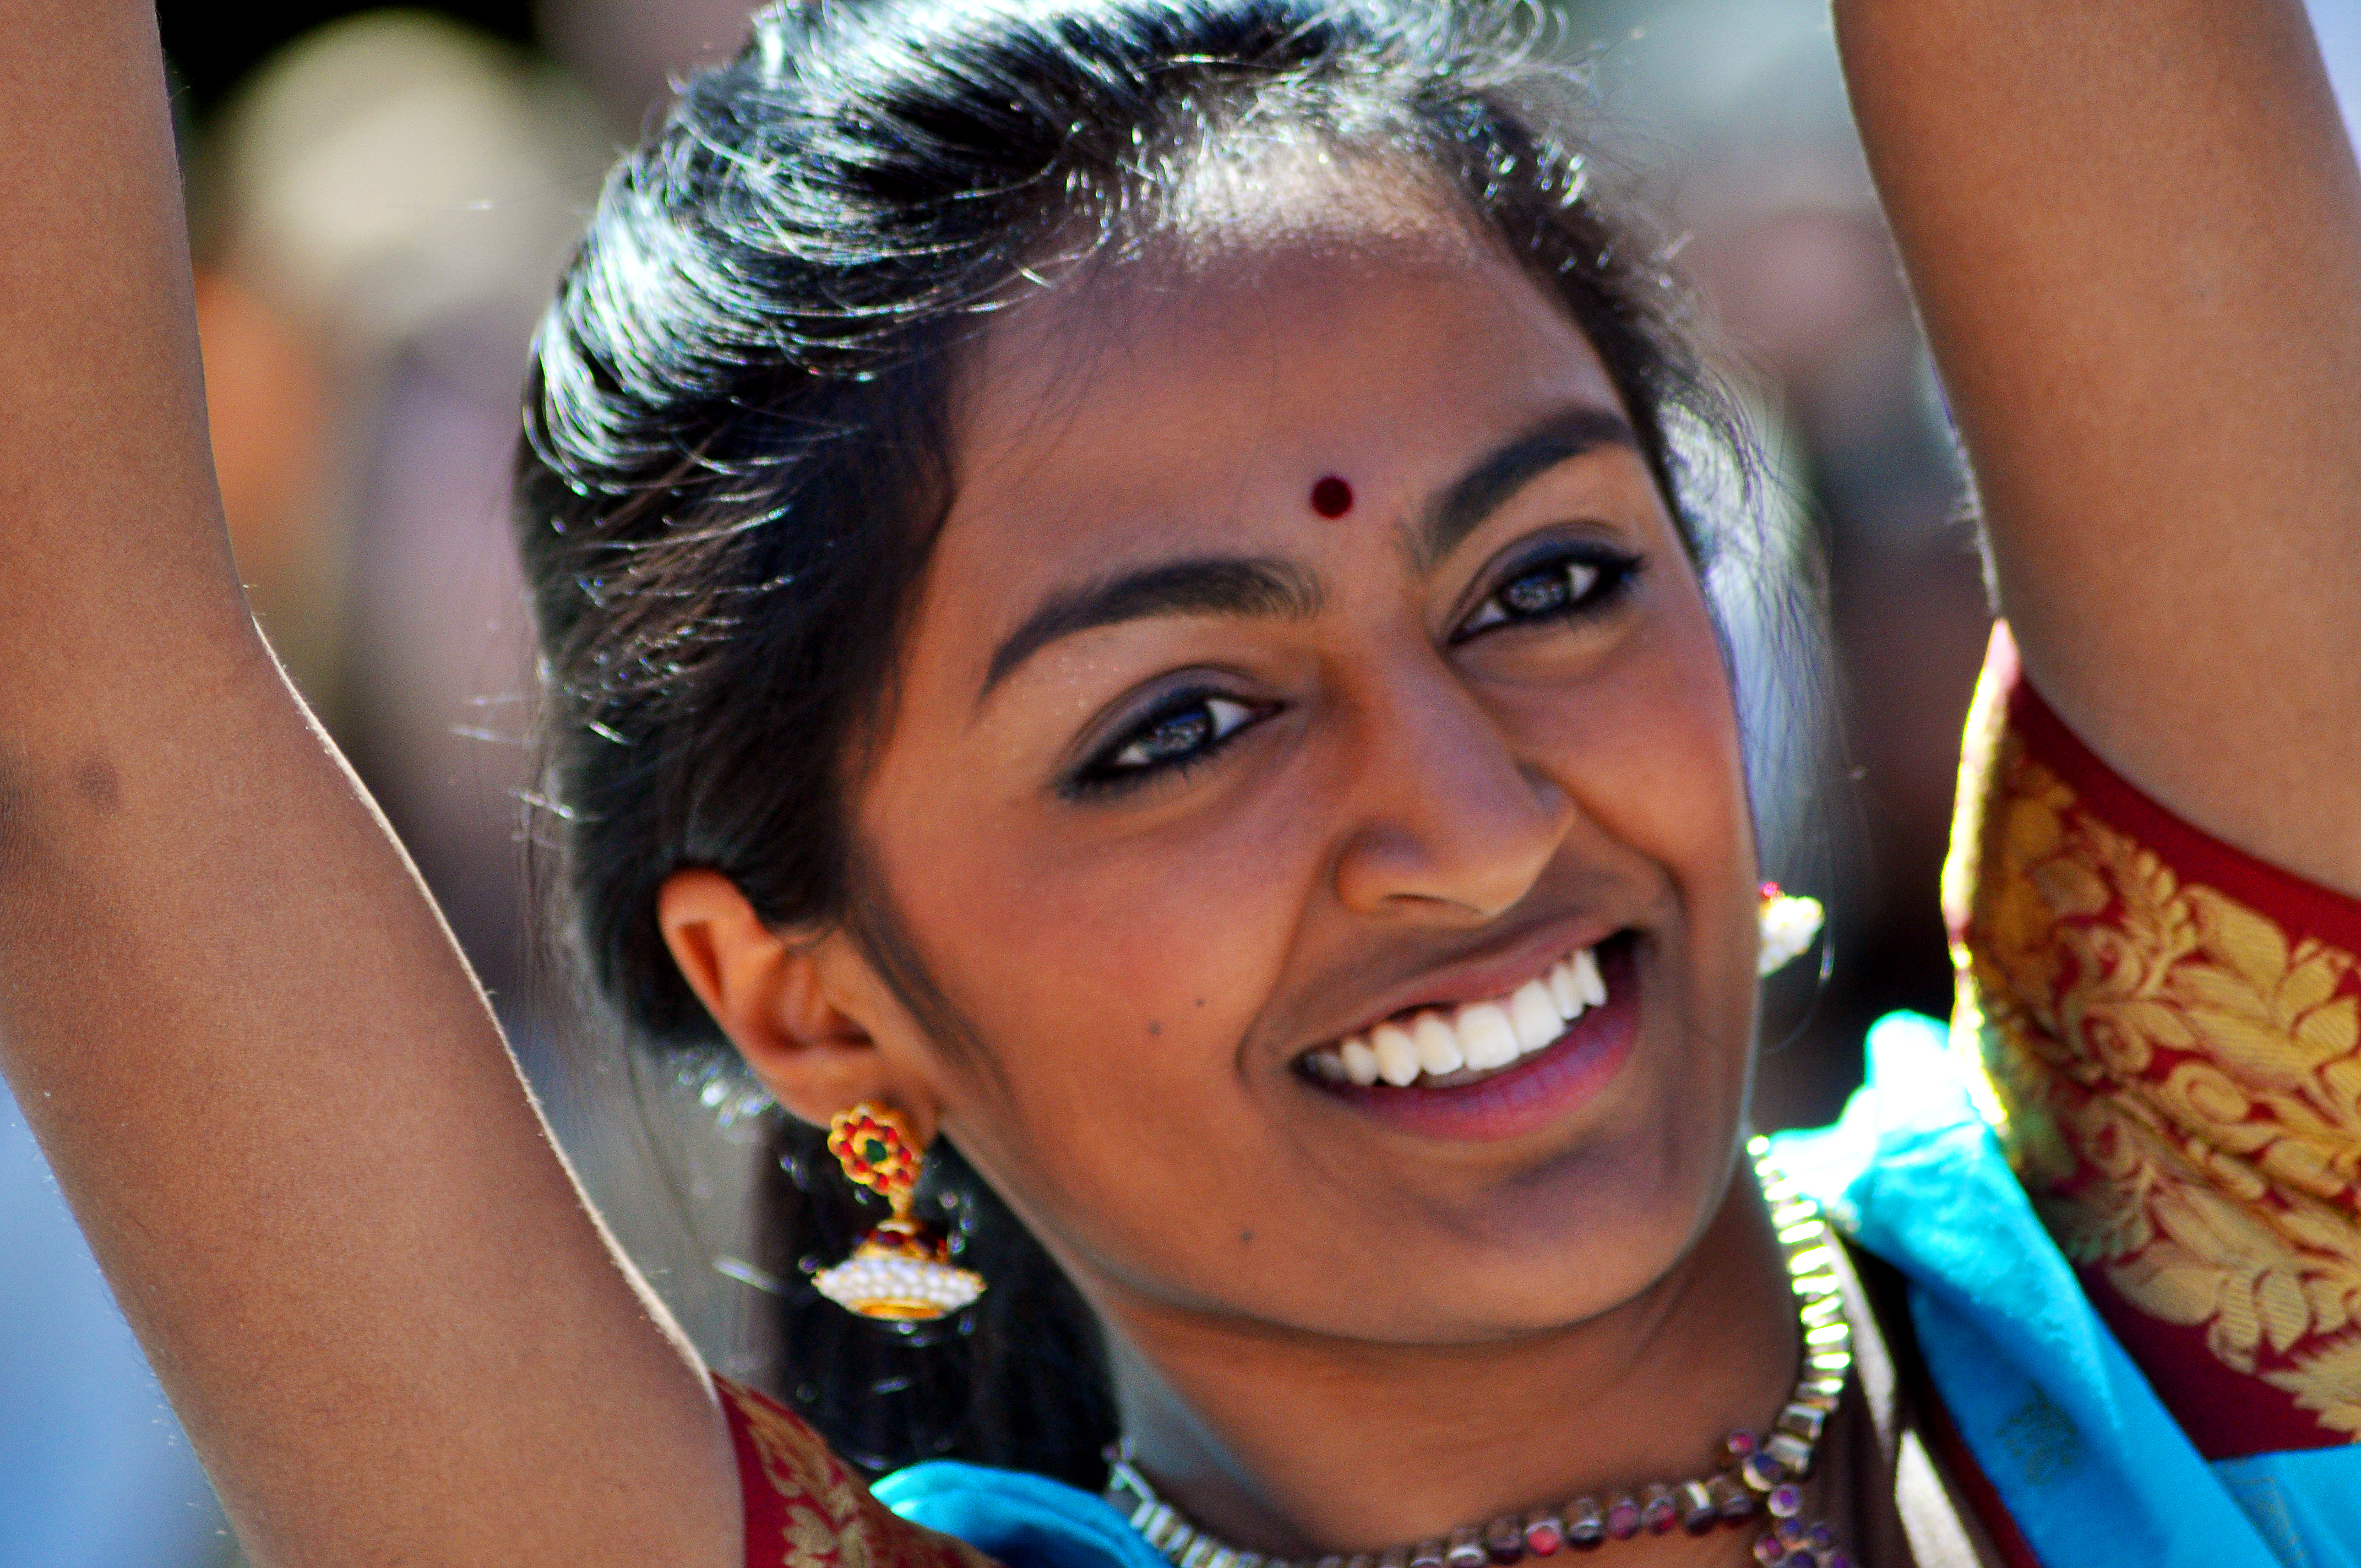 A dancer smiles as she performs at the International Street Fair.